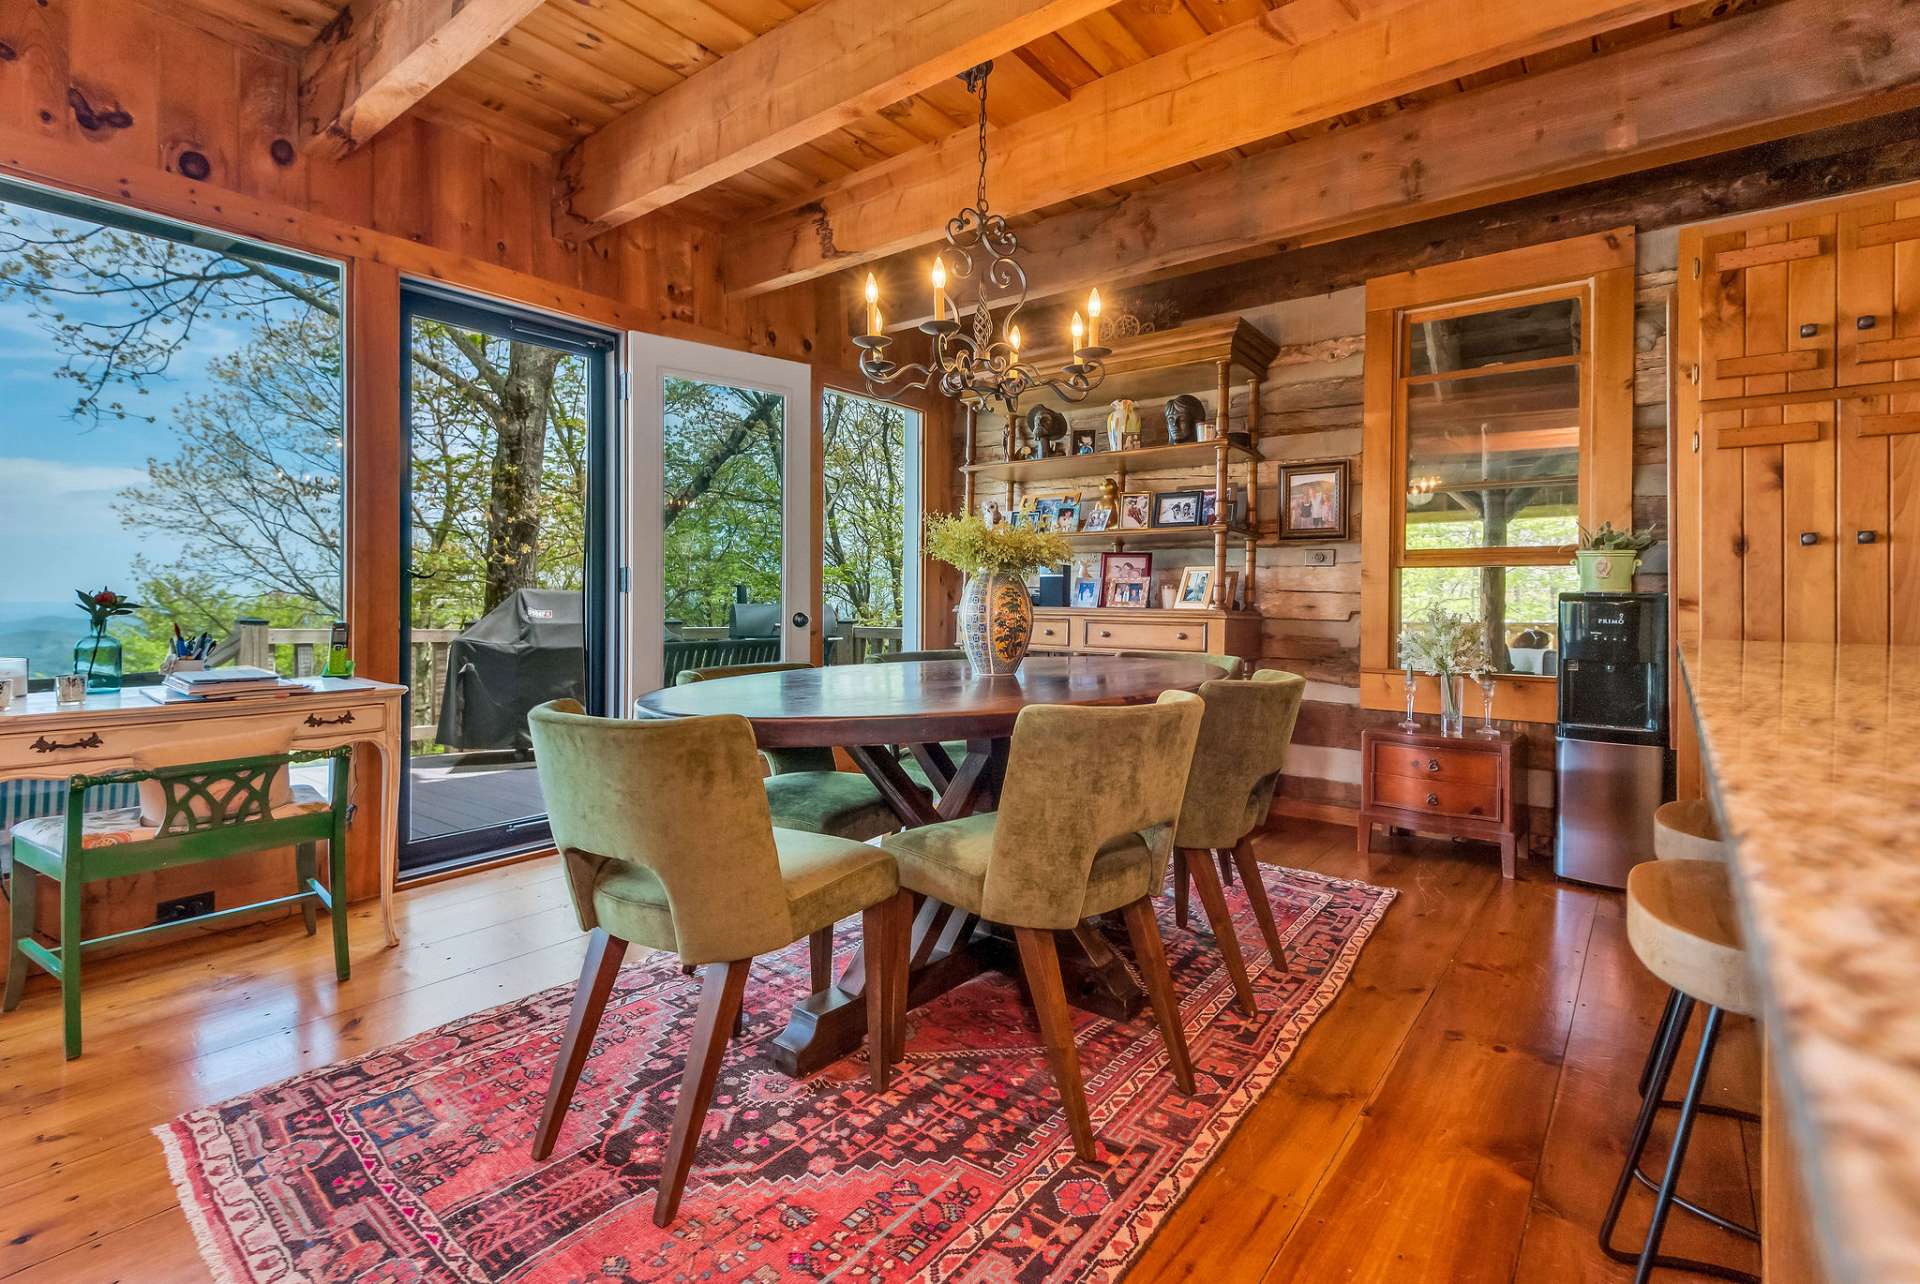 Enjoy the unforced elegance and style in this mountain retreat.